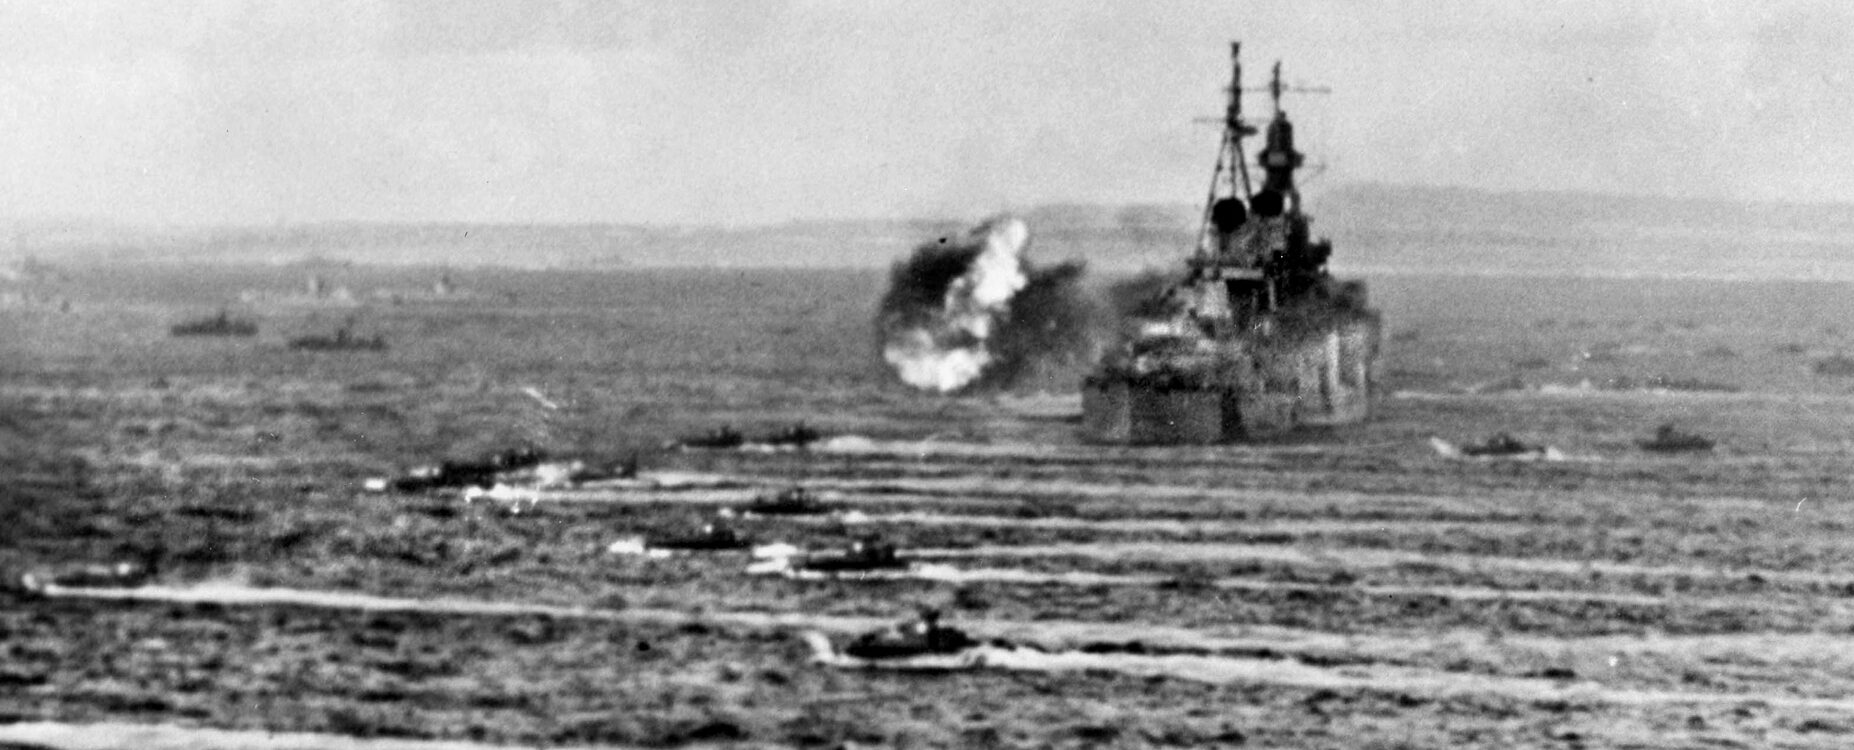 The Indy fires a broadside with her 8-inch guns at Japanese positions on Saipan as landing craft (foreground) head for the invasion beaches, July 1944.